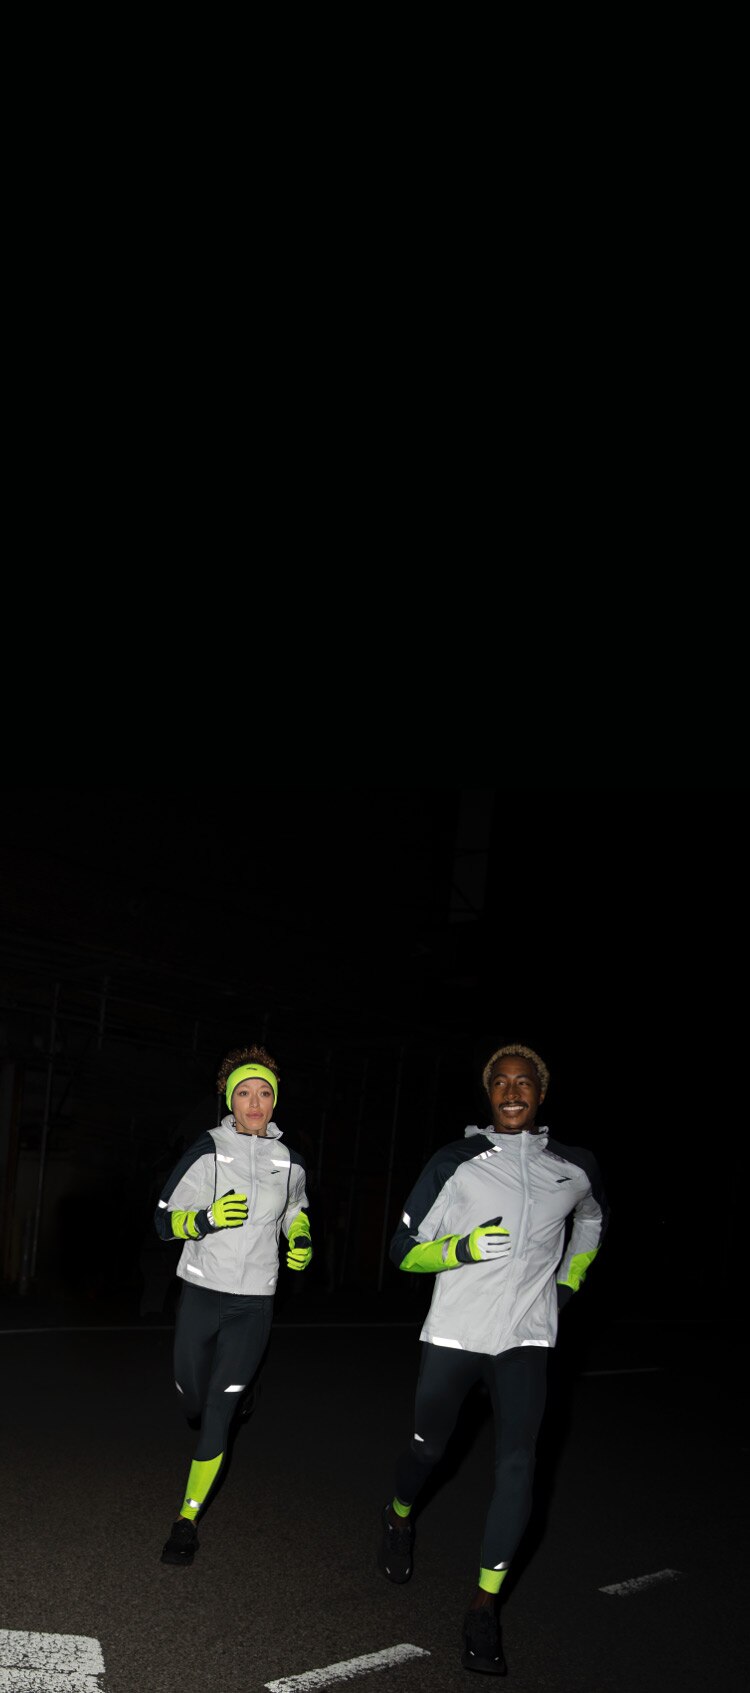 Models with Run Visible gear running in the dark